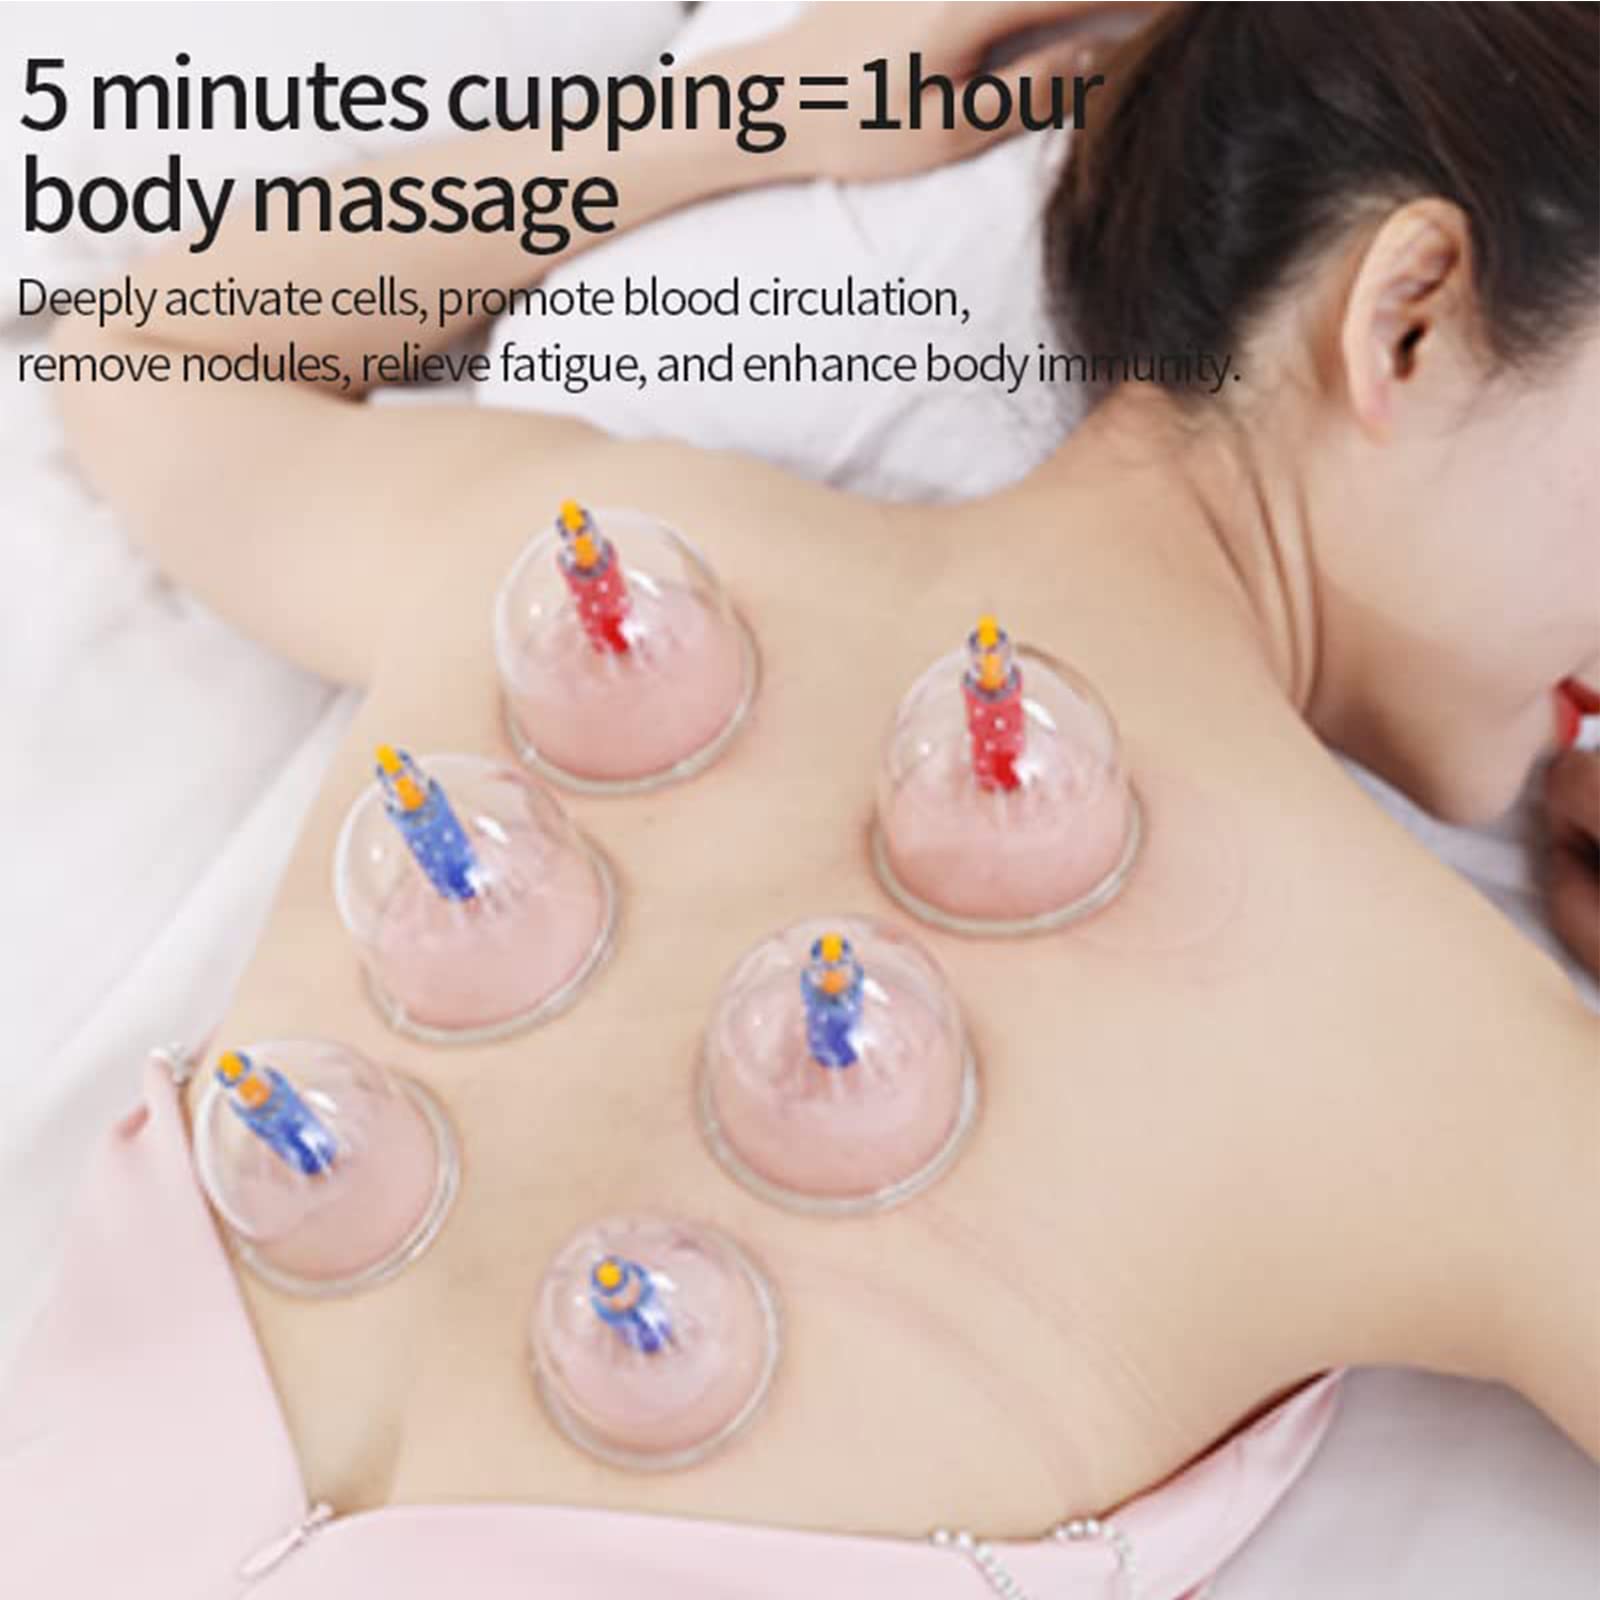 Cupping Therapy Set, 24Pcs Professional Chinese Acupoint Massage Therapy Cups with Vacuum Pump/Removable Magnetic Column, Hijama Physical Biomagnetic Cupping Kit (Standard 24Pcs)